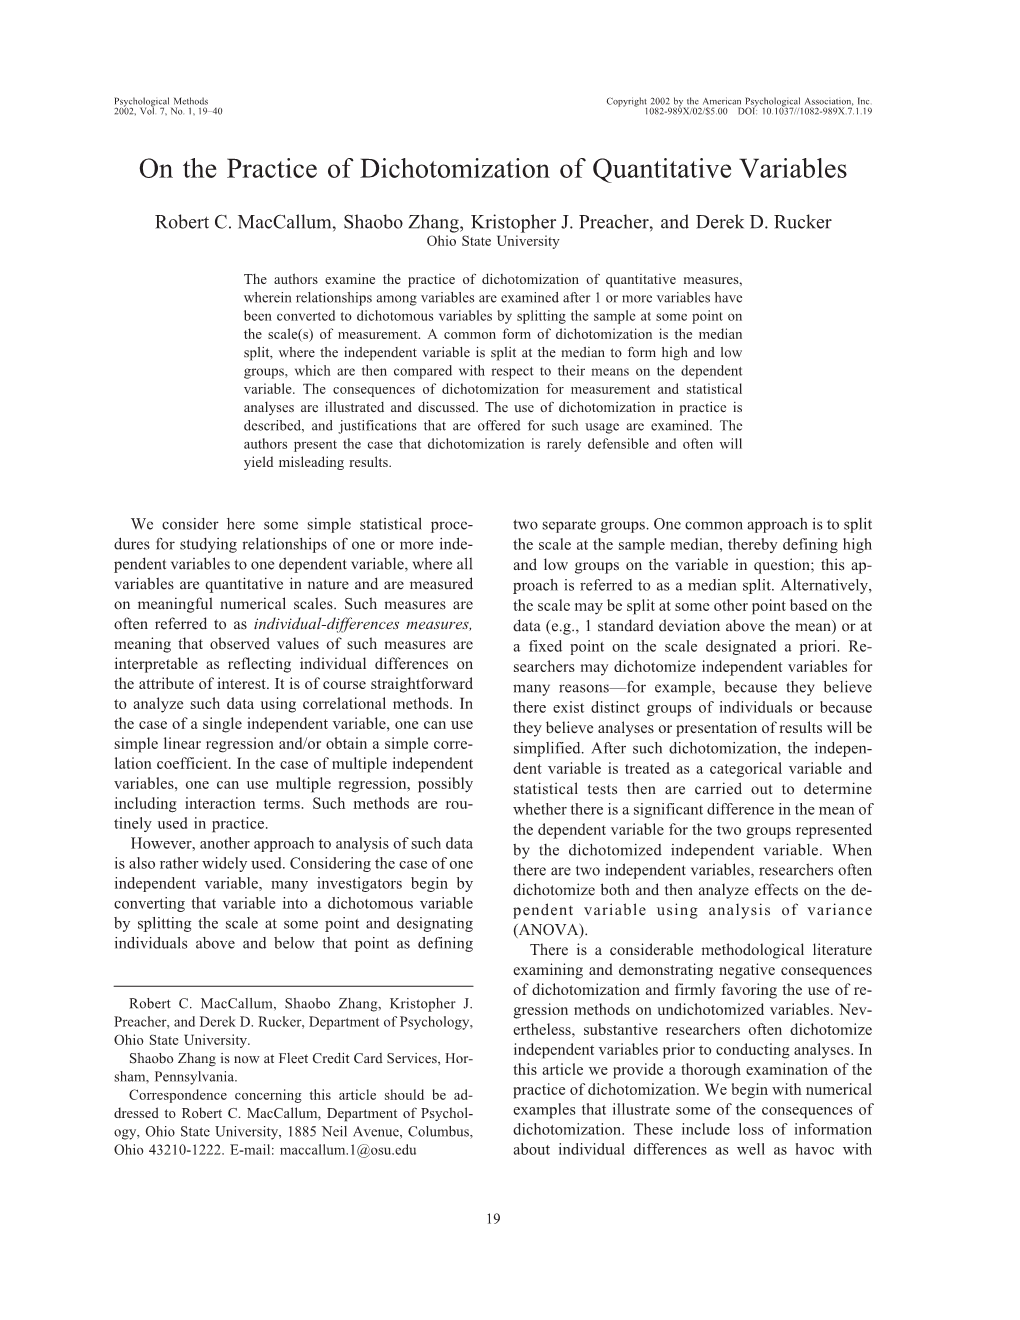 On the Practice of Dichotomization of Quantitative Variables